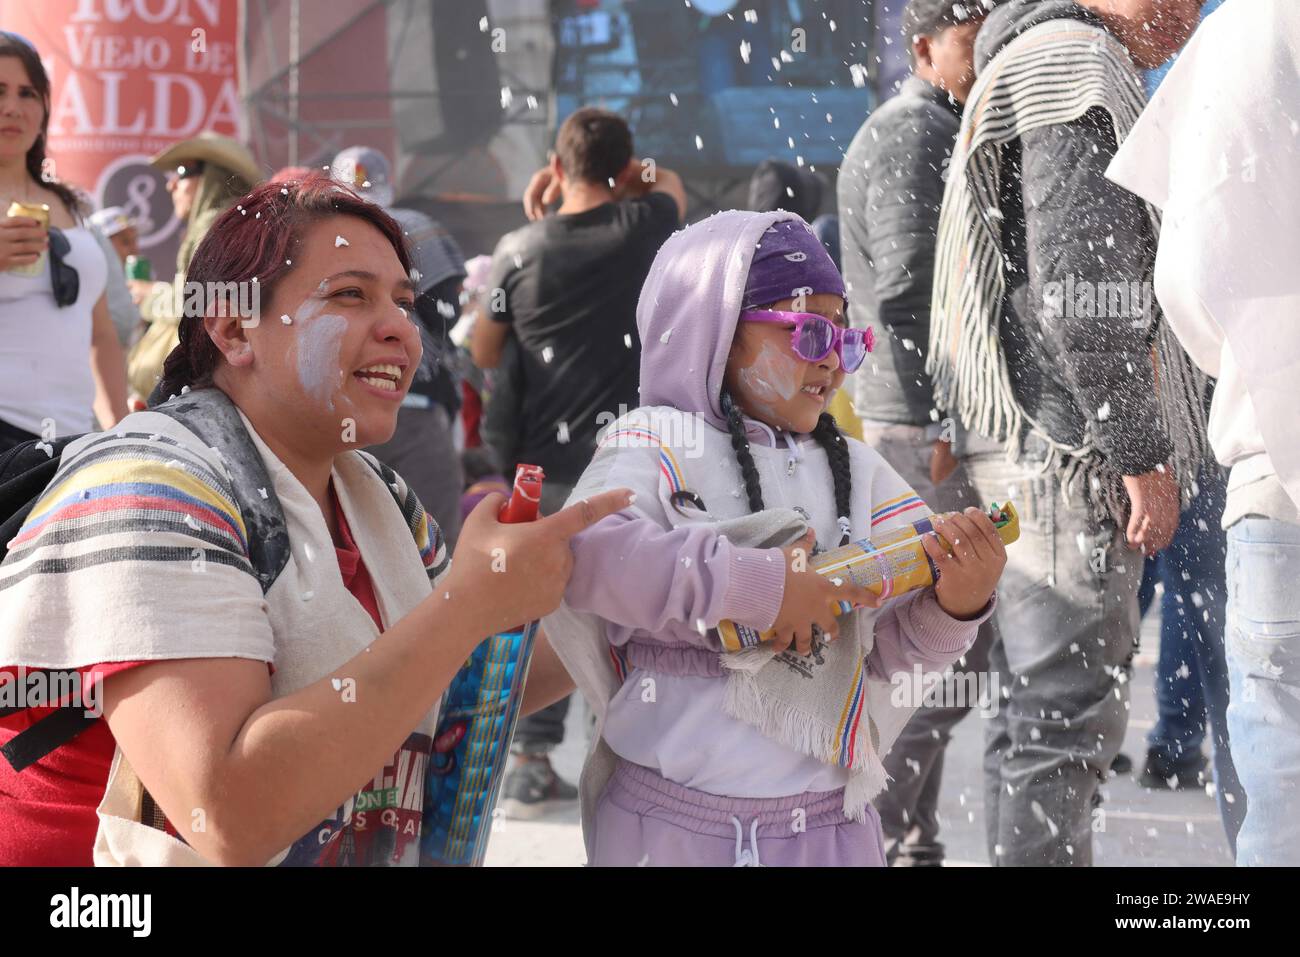 Pasto. 3rd Jan, 2024. Revelers enjoy their time during the Carnival of Blacks and Whites in Pasto, Colombia on Jan. 3, 2024. The carnival was inscribed on the UNESCO Representative List of the Intangible Cultural Heritage of Humanity in 2009. Credit: Zhou Shengping/Xinhua/Alamy Live News Stock Photo